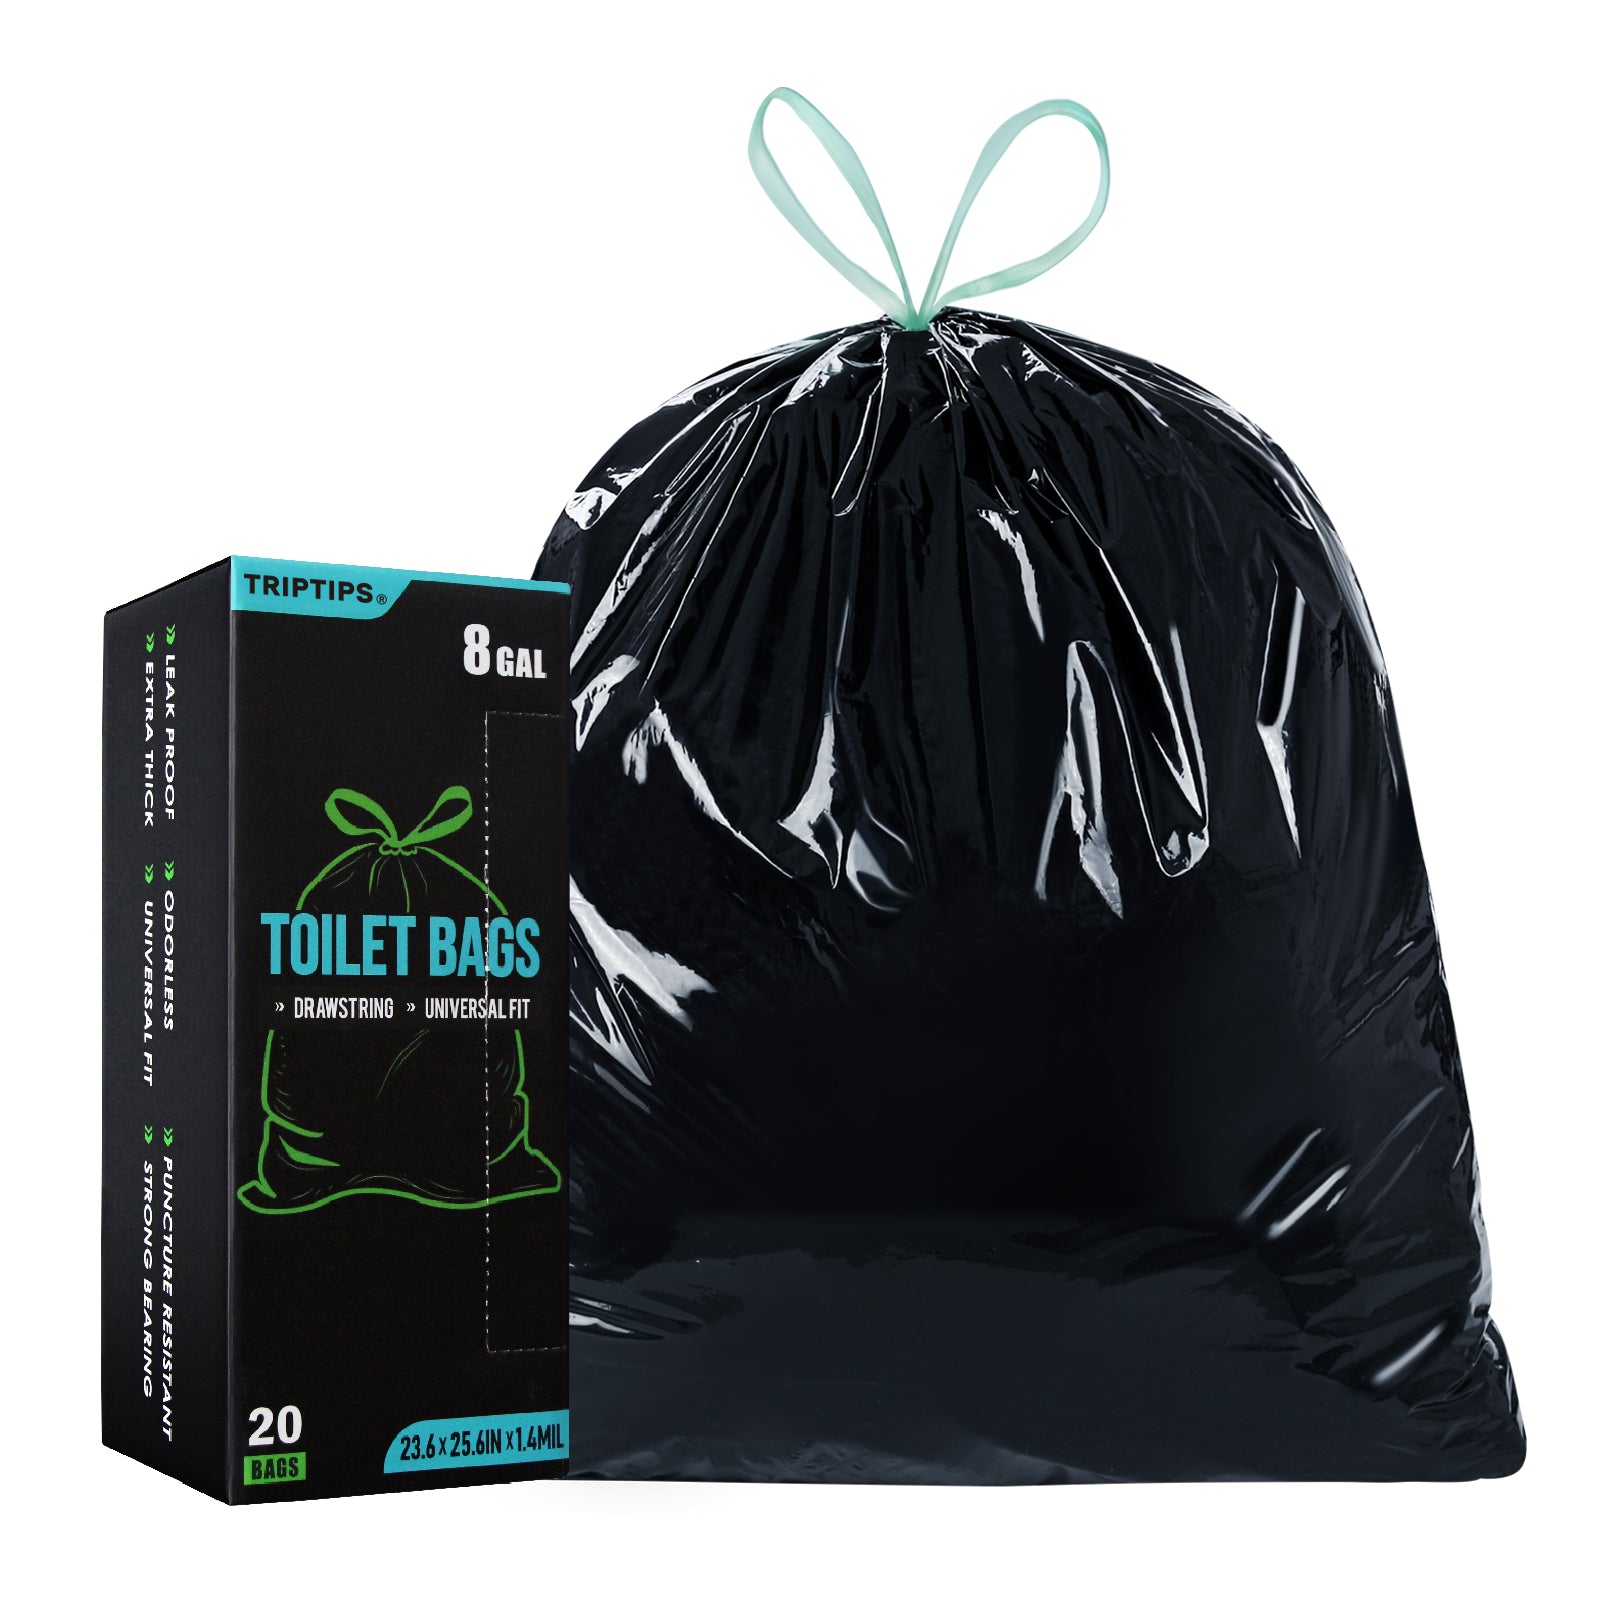 TRIPTIPS Portable Toilet Bags 20 Count Drawstring 8 Gallon Camping Toilet Bags Leak-Proof Toilet Liners for Camping, Hiking, Traveling